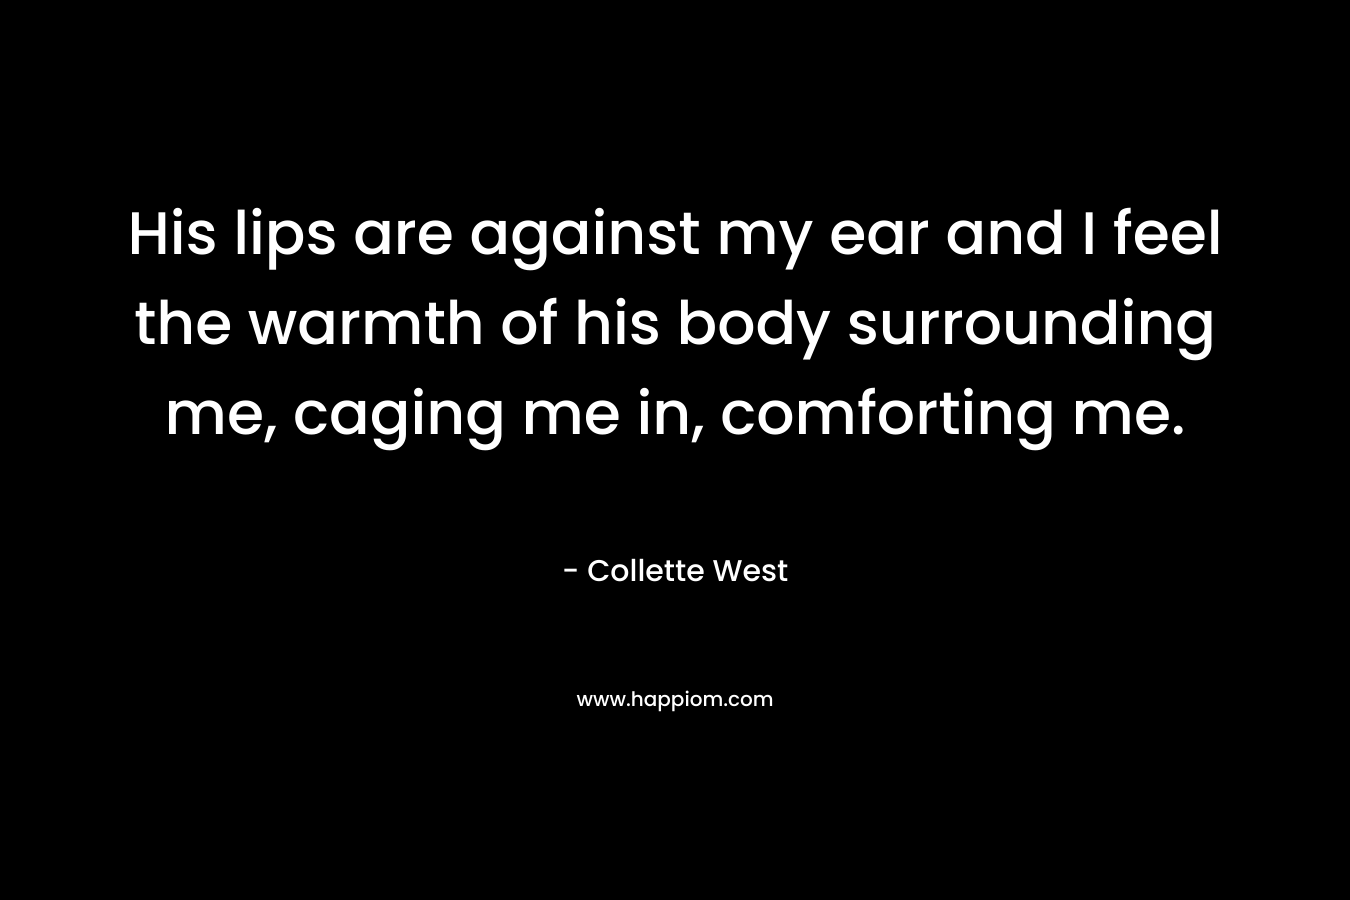 His lips are against my ear and I feel the warmth of his body surrounding me, caging me in, comforting me.